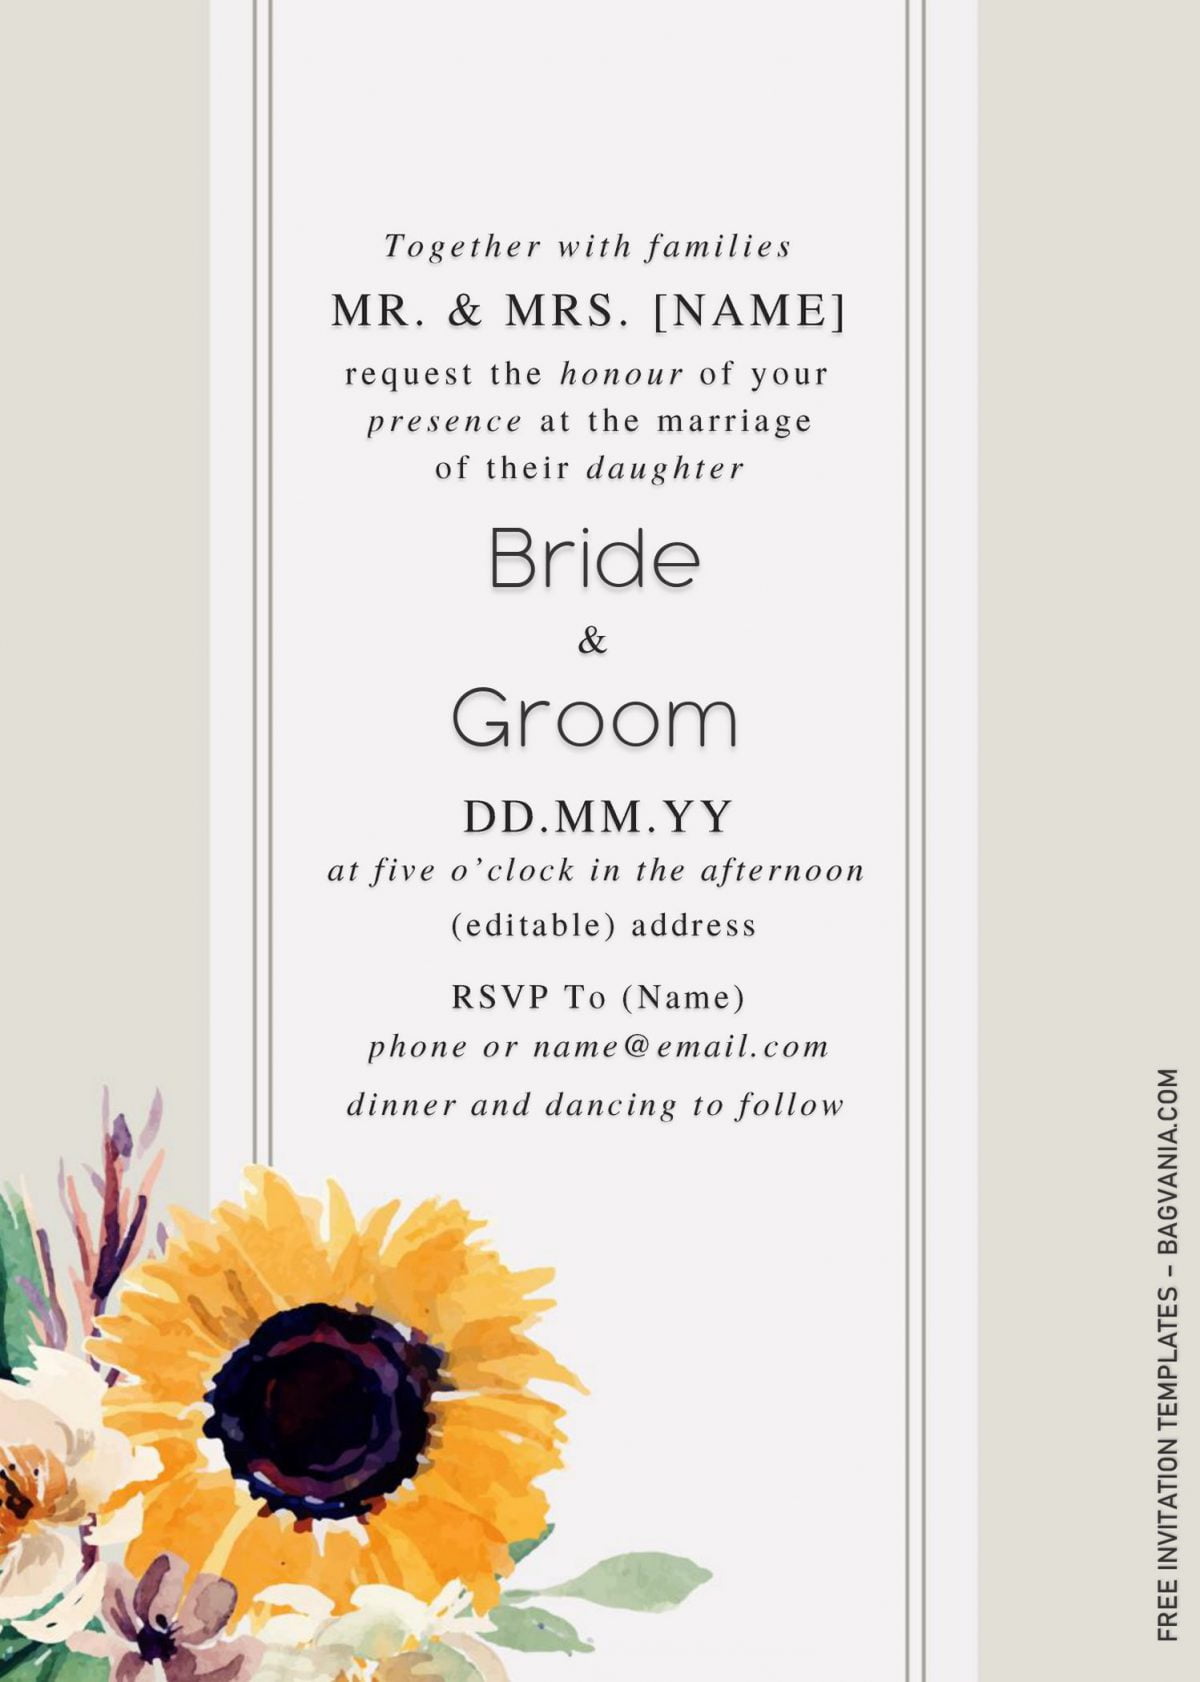 Sunflower Wedding Invitation Templates - Editable With Microsoft Word and has bright yellow sunflowers